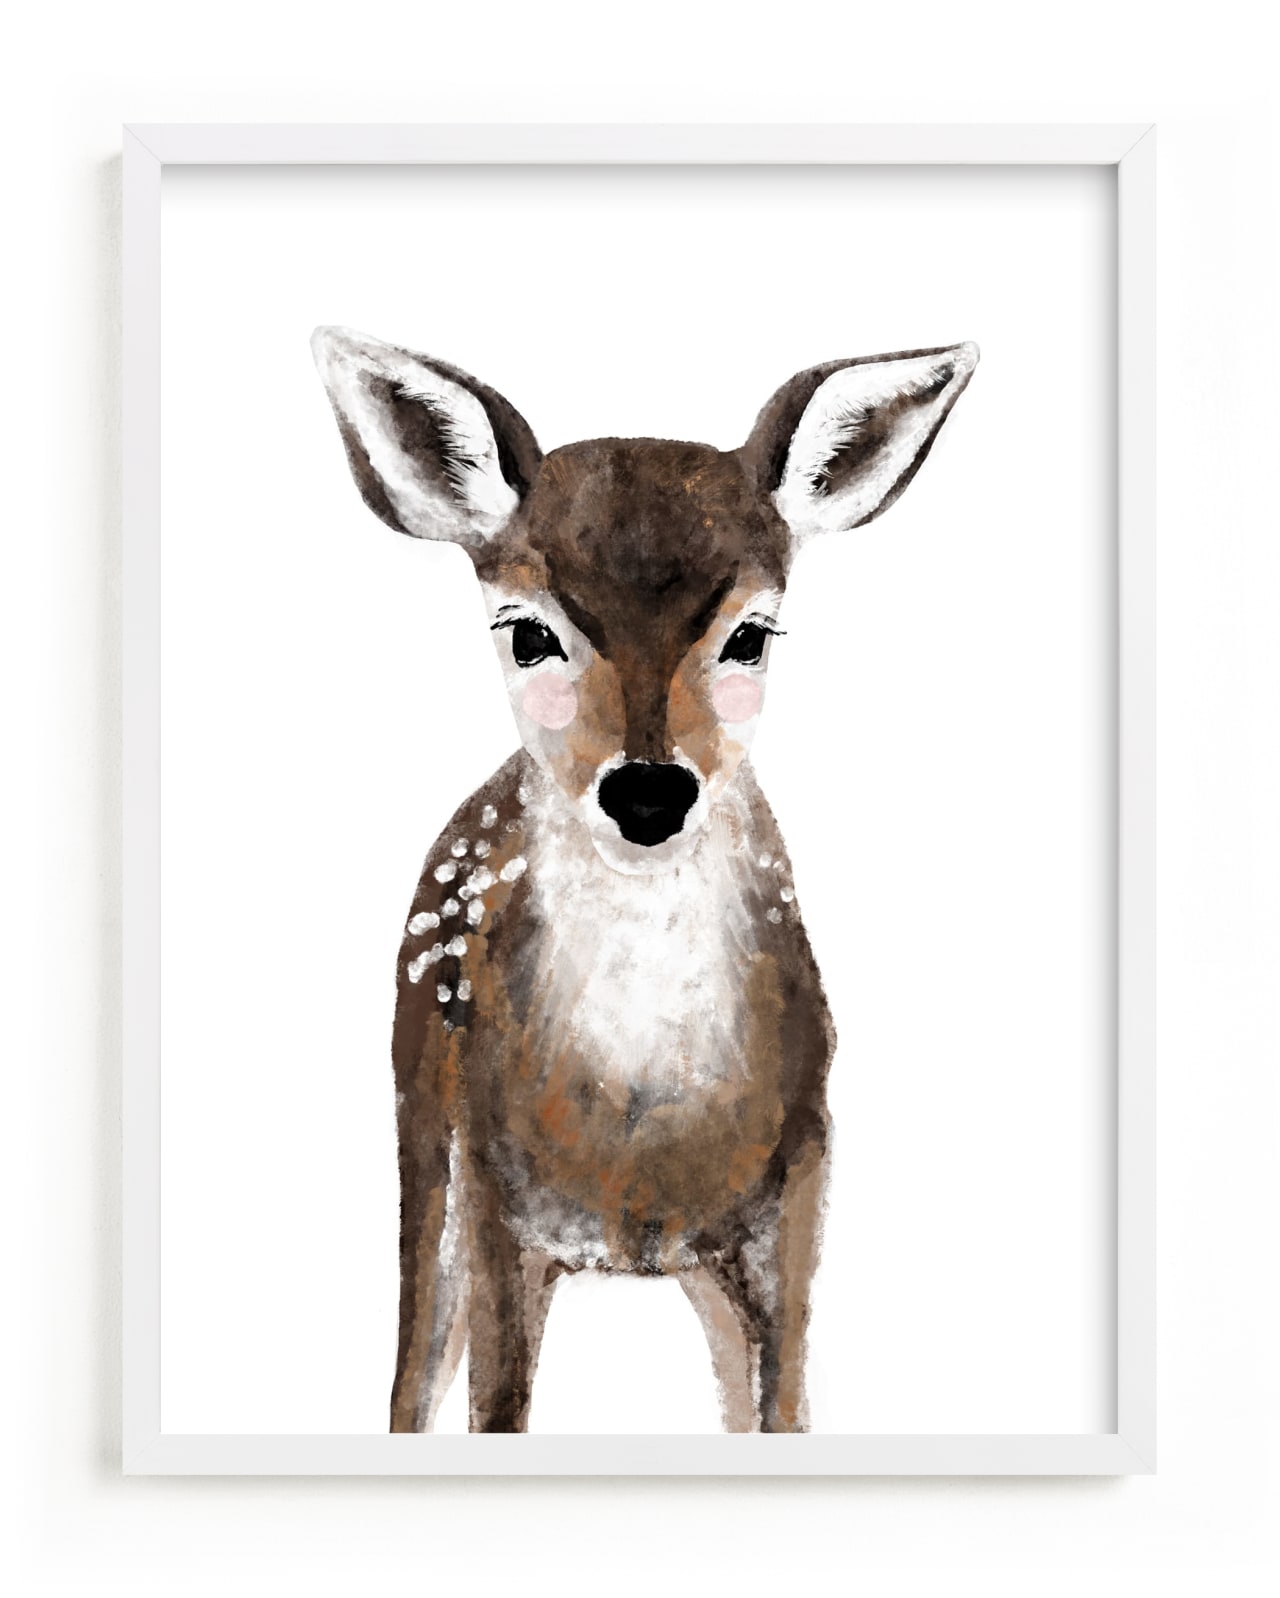 This is a brown kids wall art by Cass Loh called Baby Animal Deer.